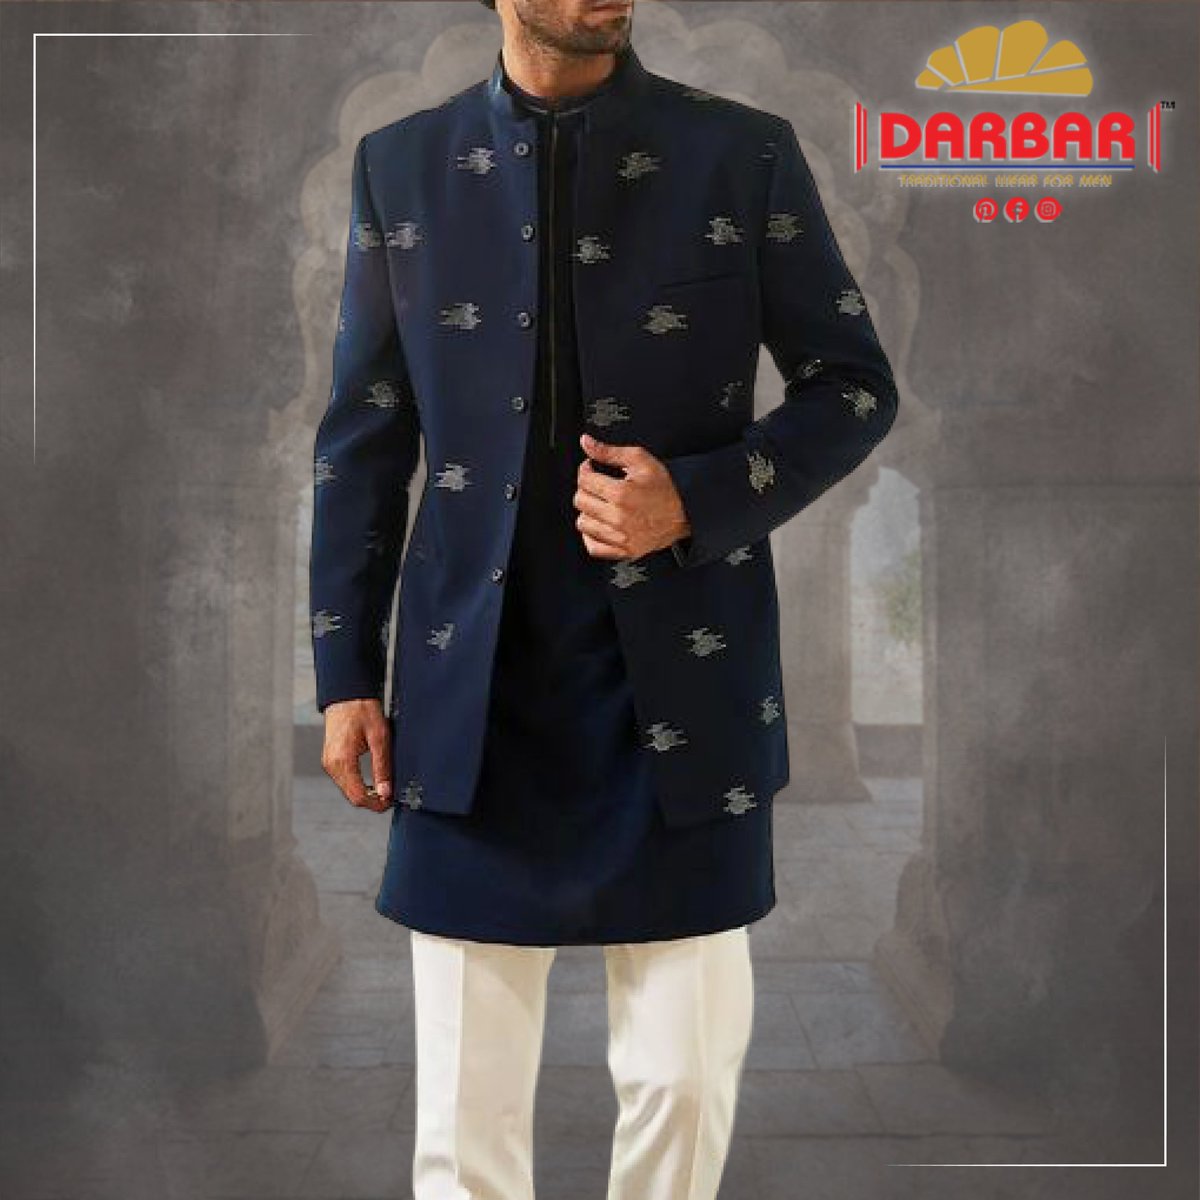 Embrace the unique and stand out from the crowd with our exquisite💫 fashion collection.
Redefine your style,✨ express yourself.
.
Shop the look🛍
.
#darbar #menstyle #bestsherwanii #bestkurta #indianwedding #weddingseason #wedding #mensethnicwear #elegantweddings #fashionformen